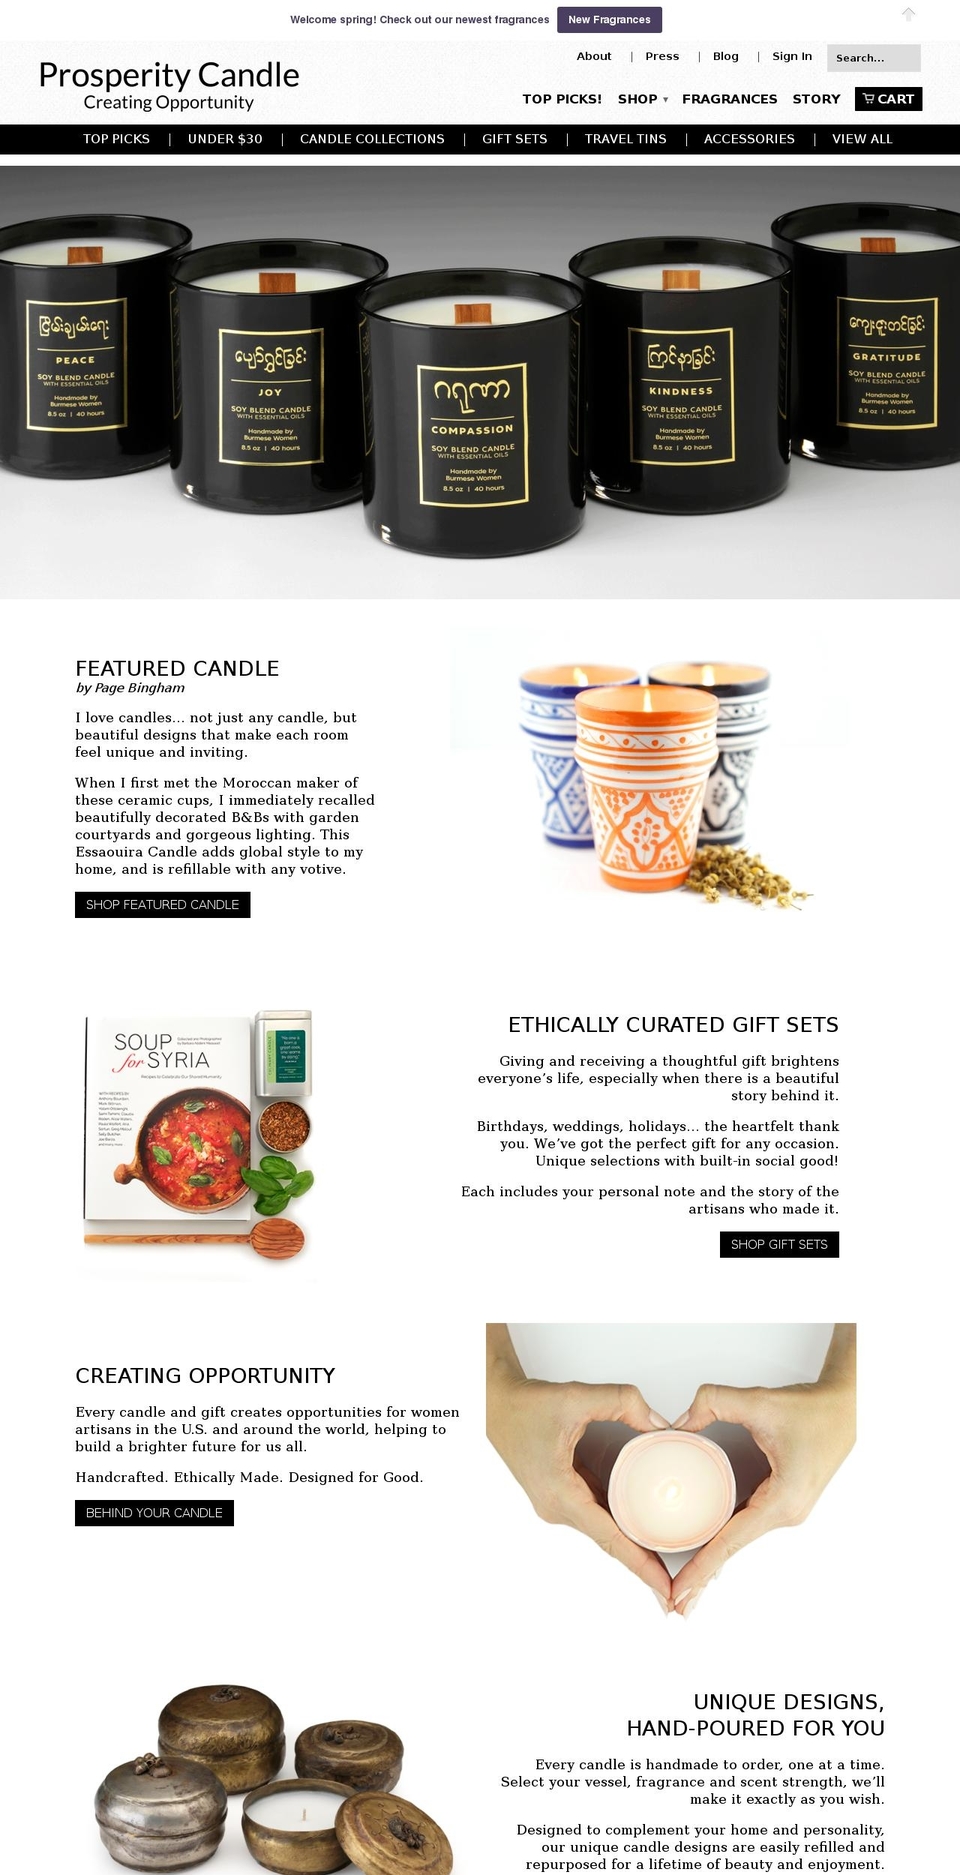 Be Yours Shopify theme site example prosperitycandle.com